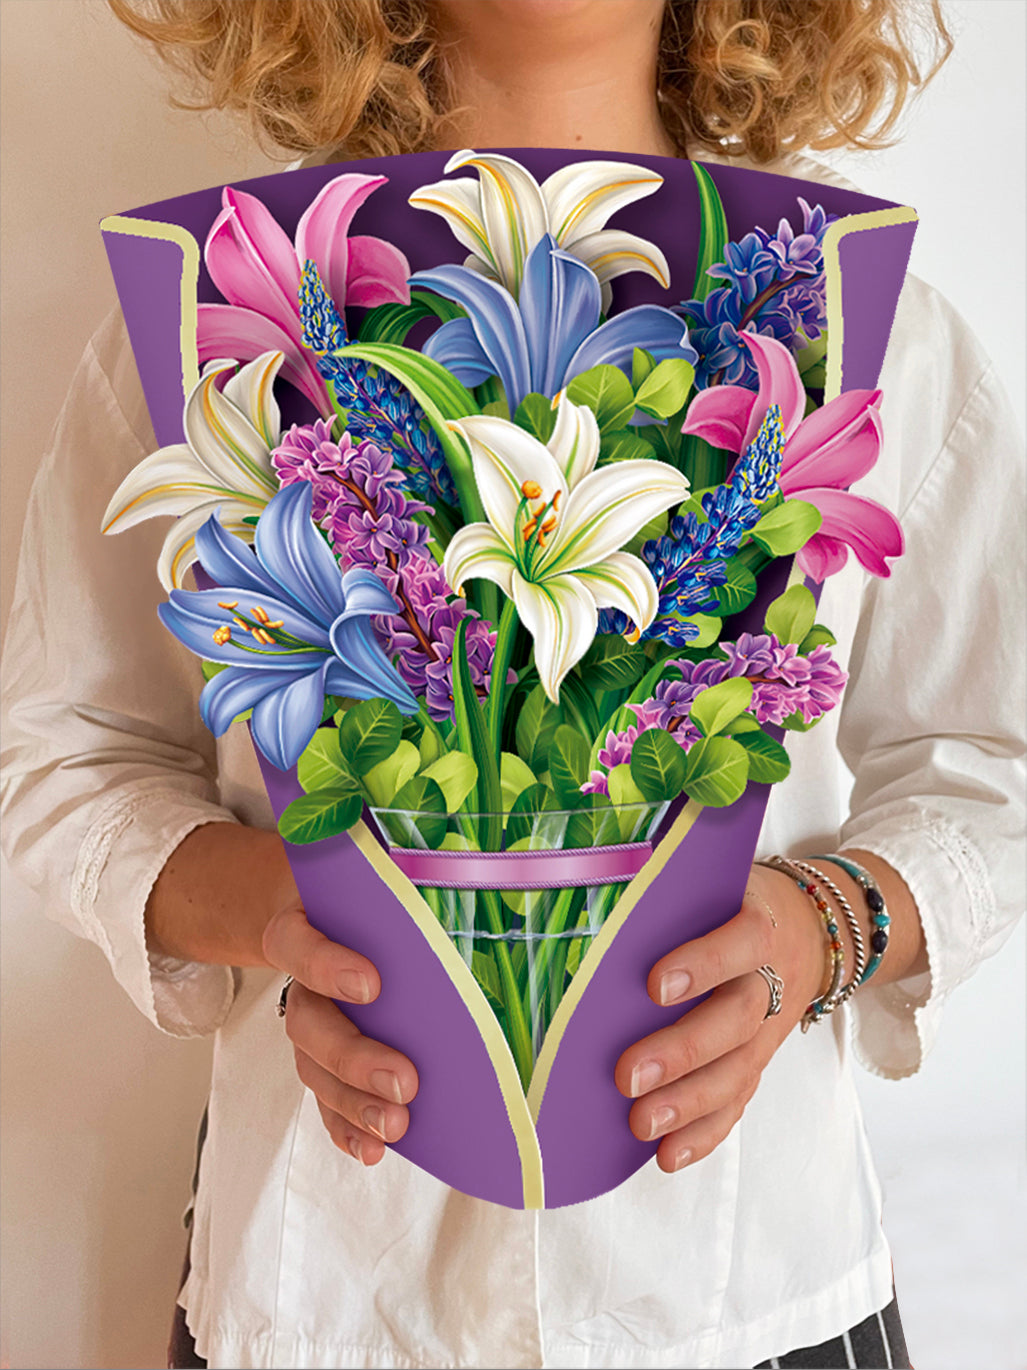 Lilies & Lupines greeting card by Fresh Cut Paper